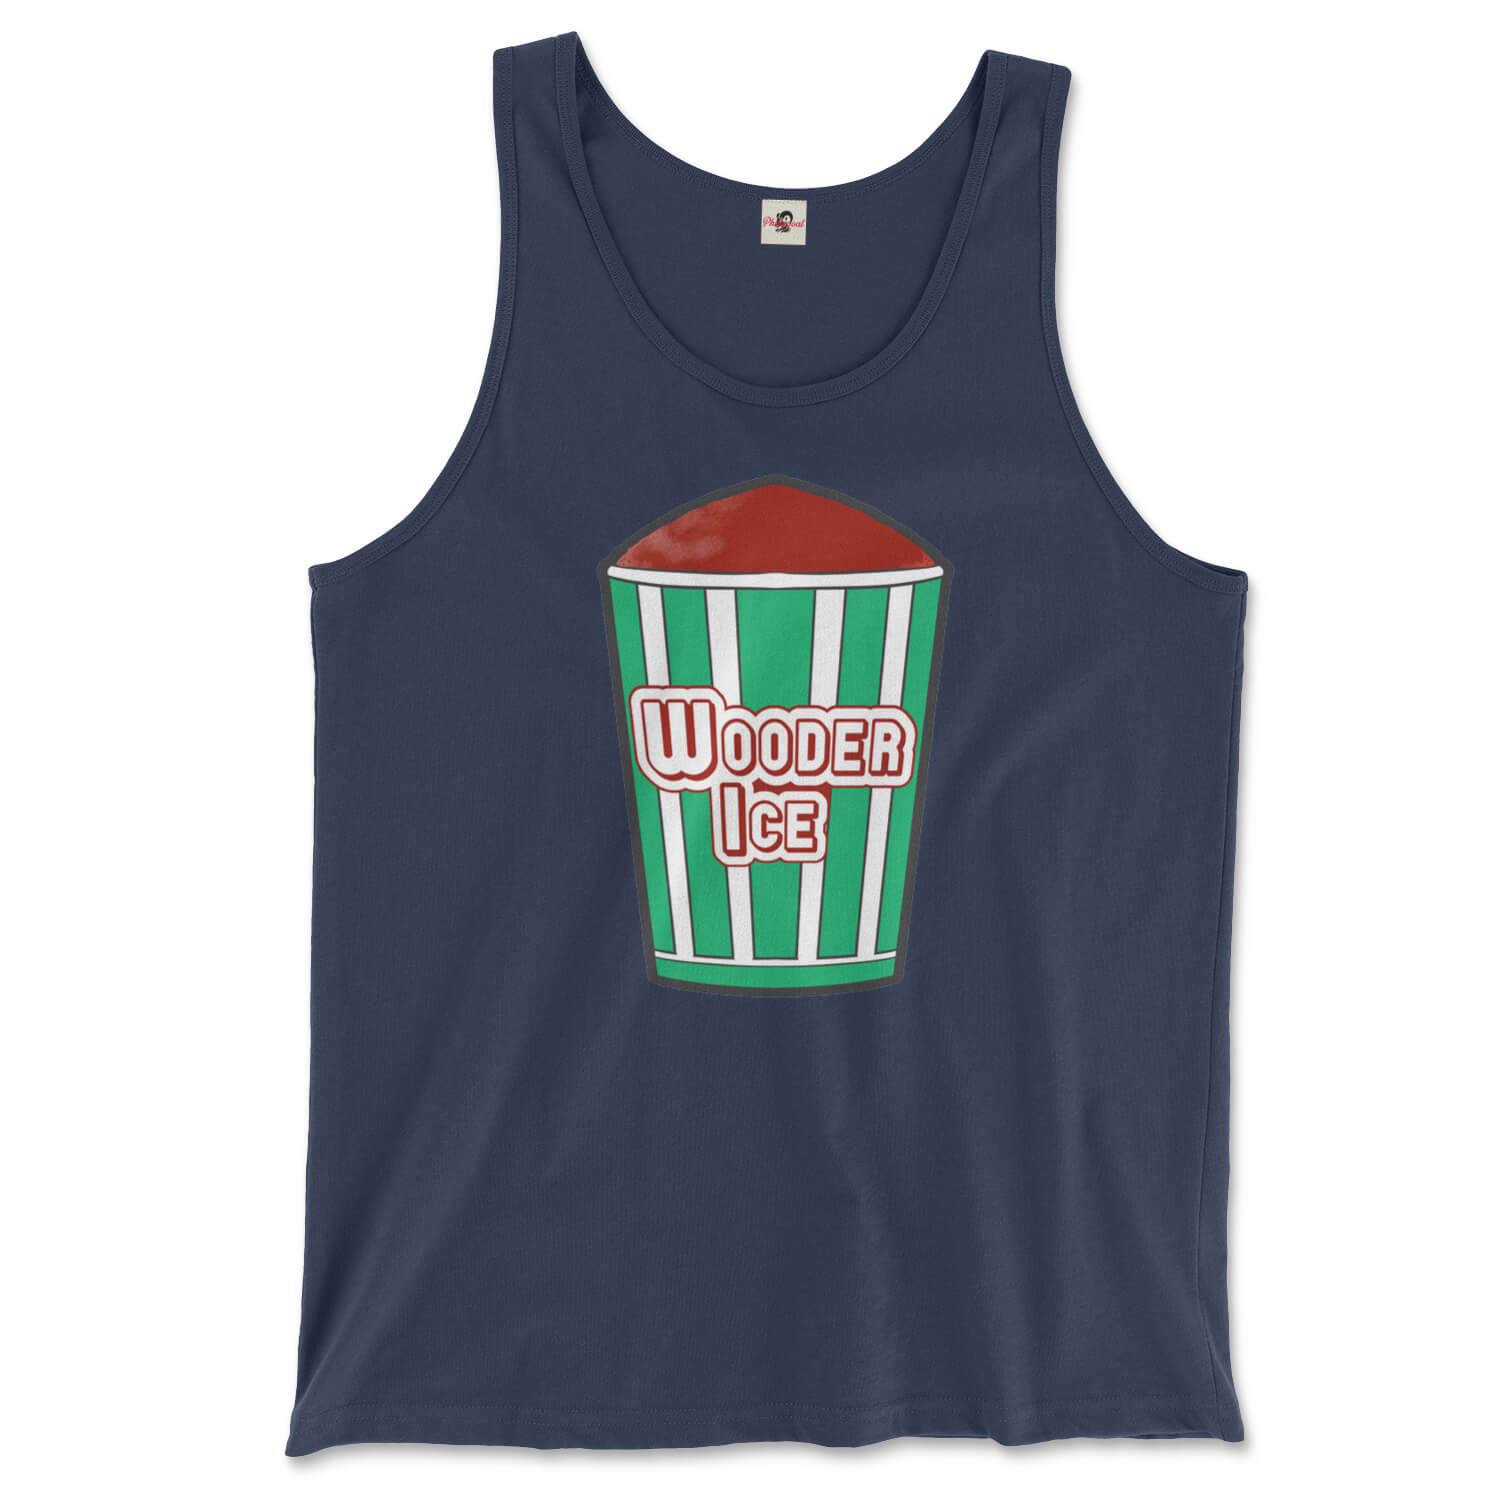 Philadelphia philly cherry italian water wooder ice design on a navy blue tank top from Phillygoat 